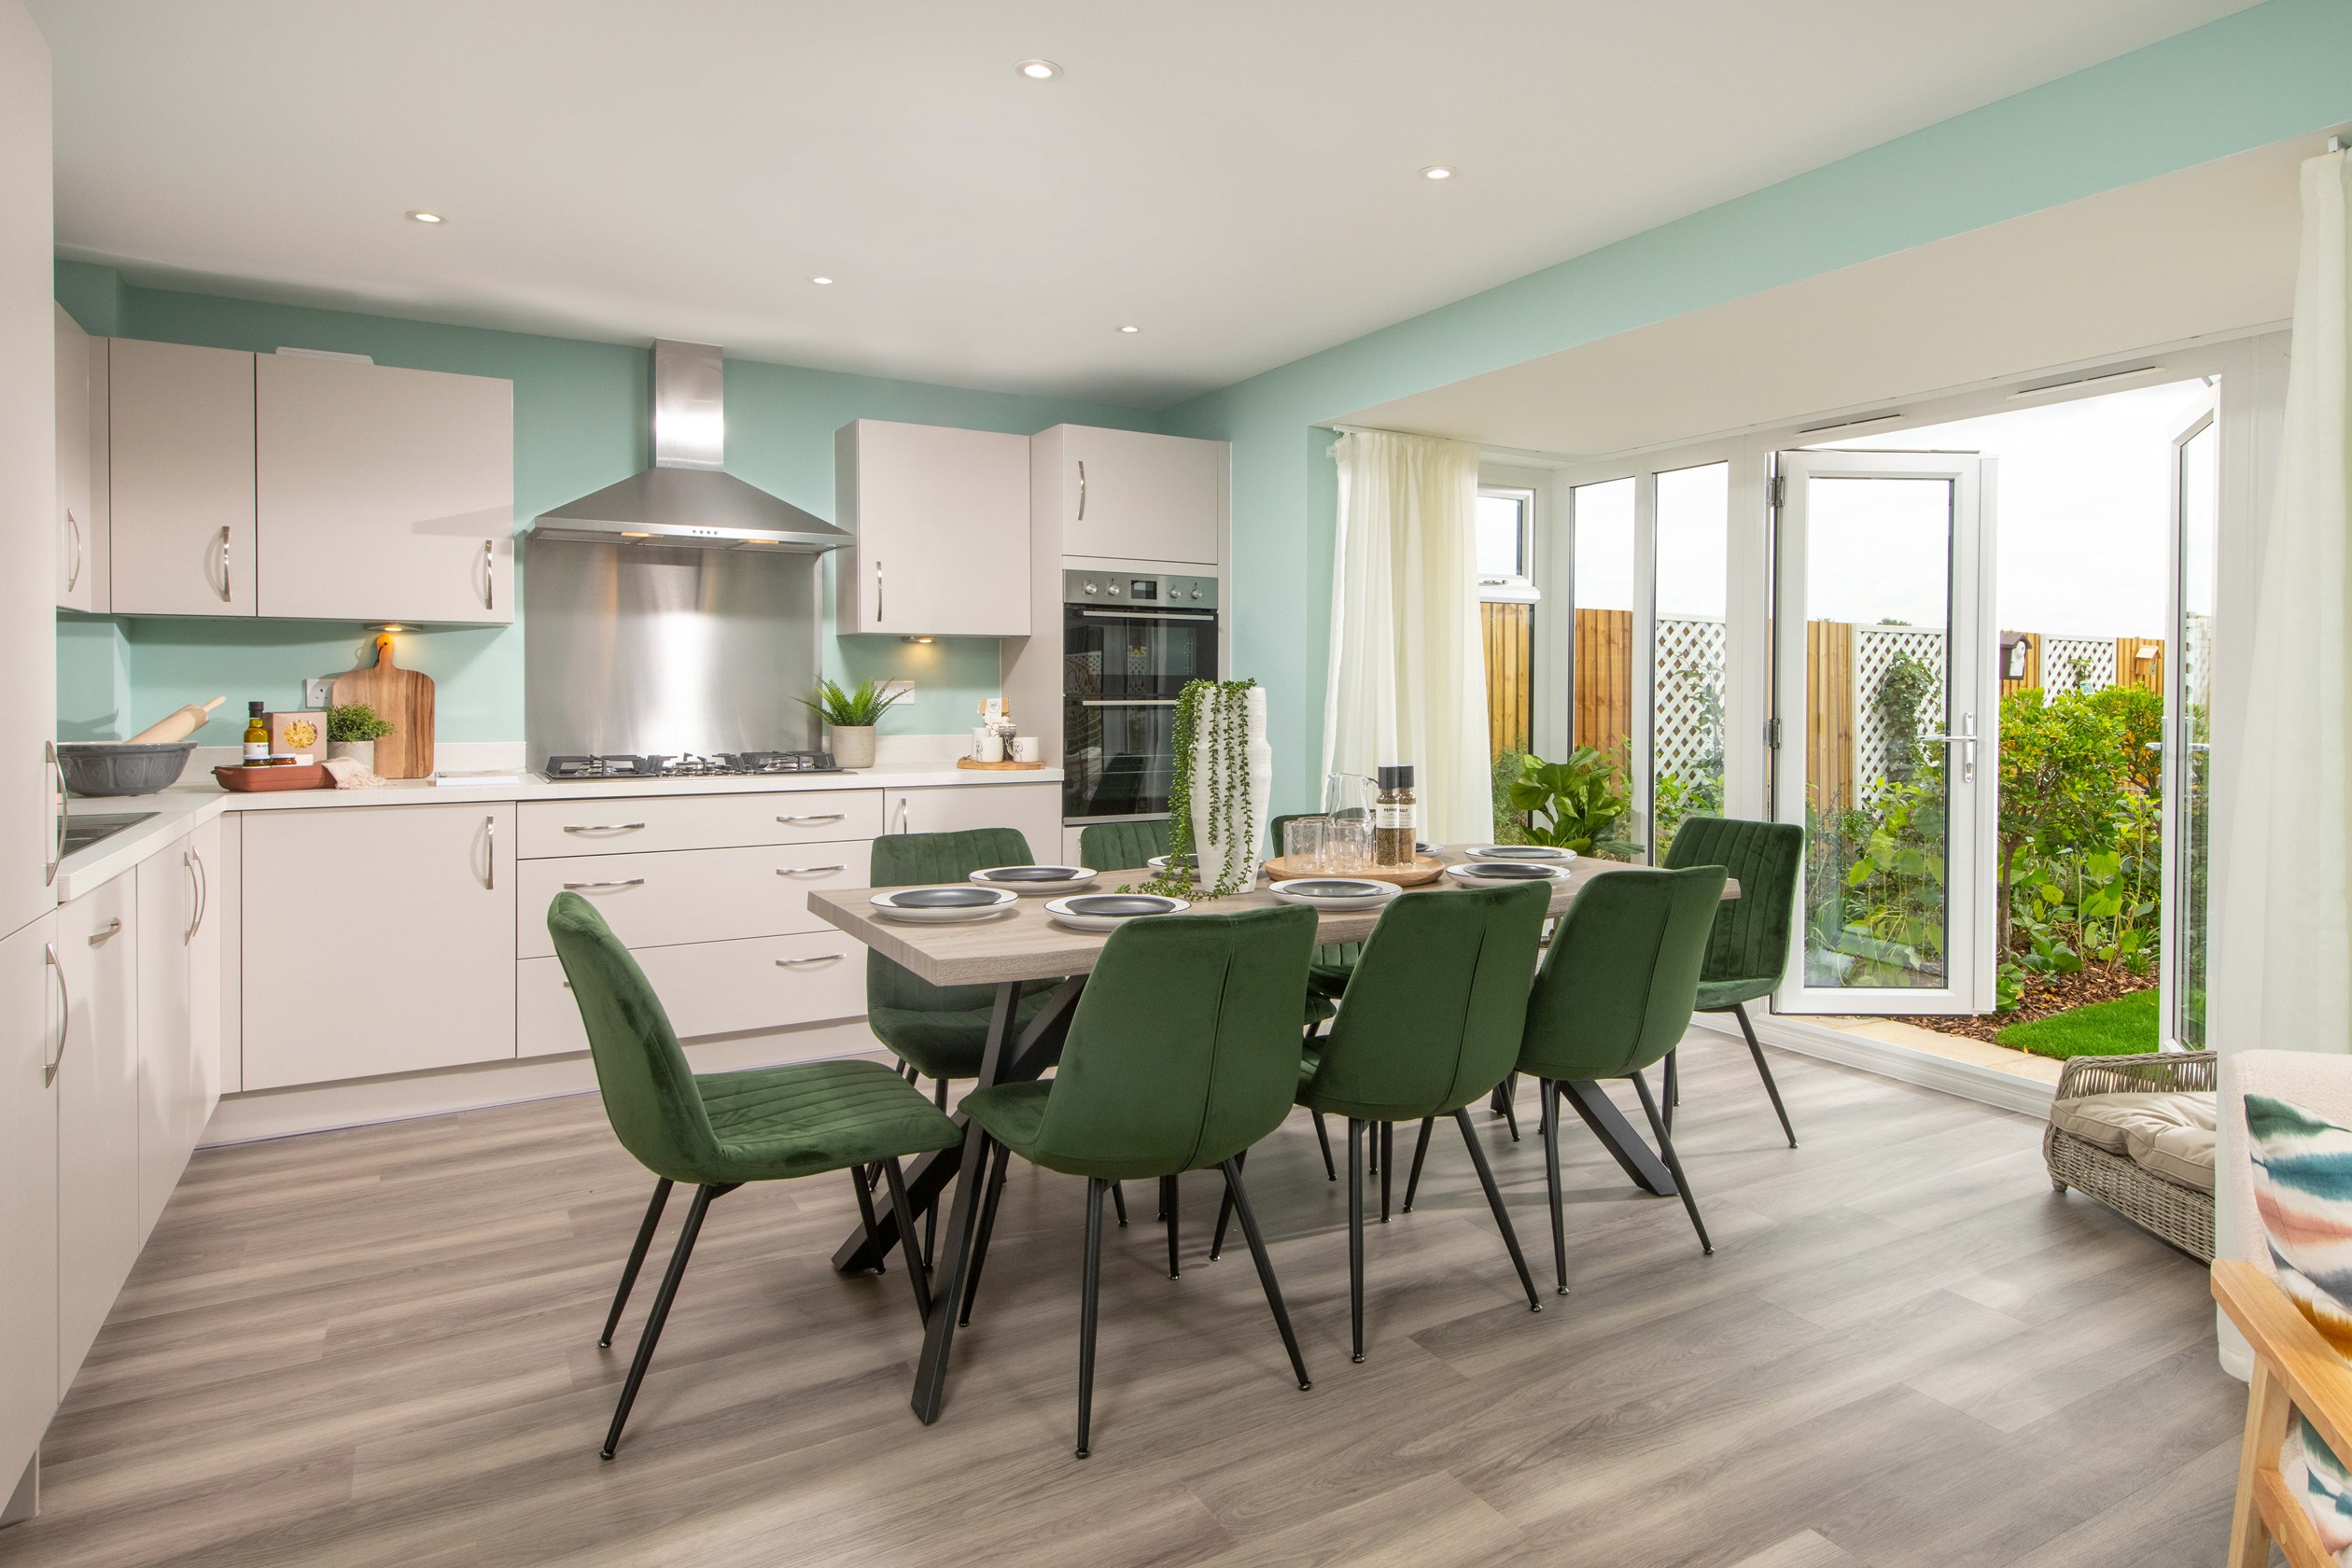 Property 3 of 10. Open-Plan Kitchen-Diner With French Doors